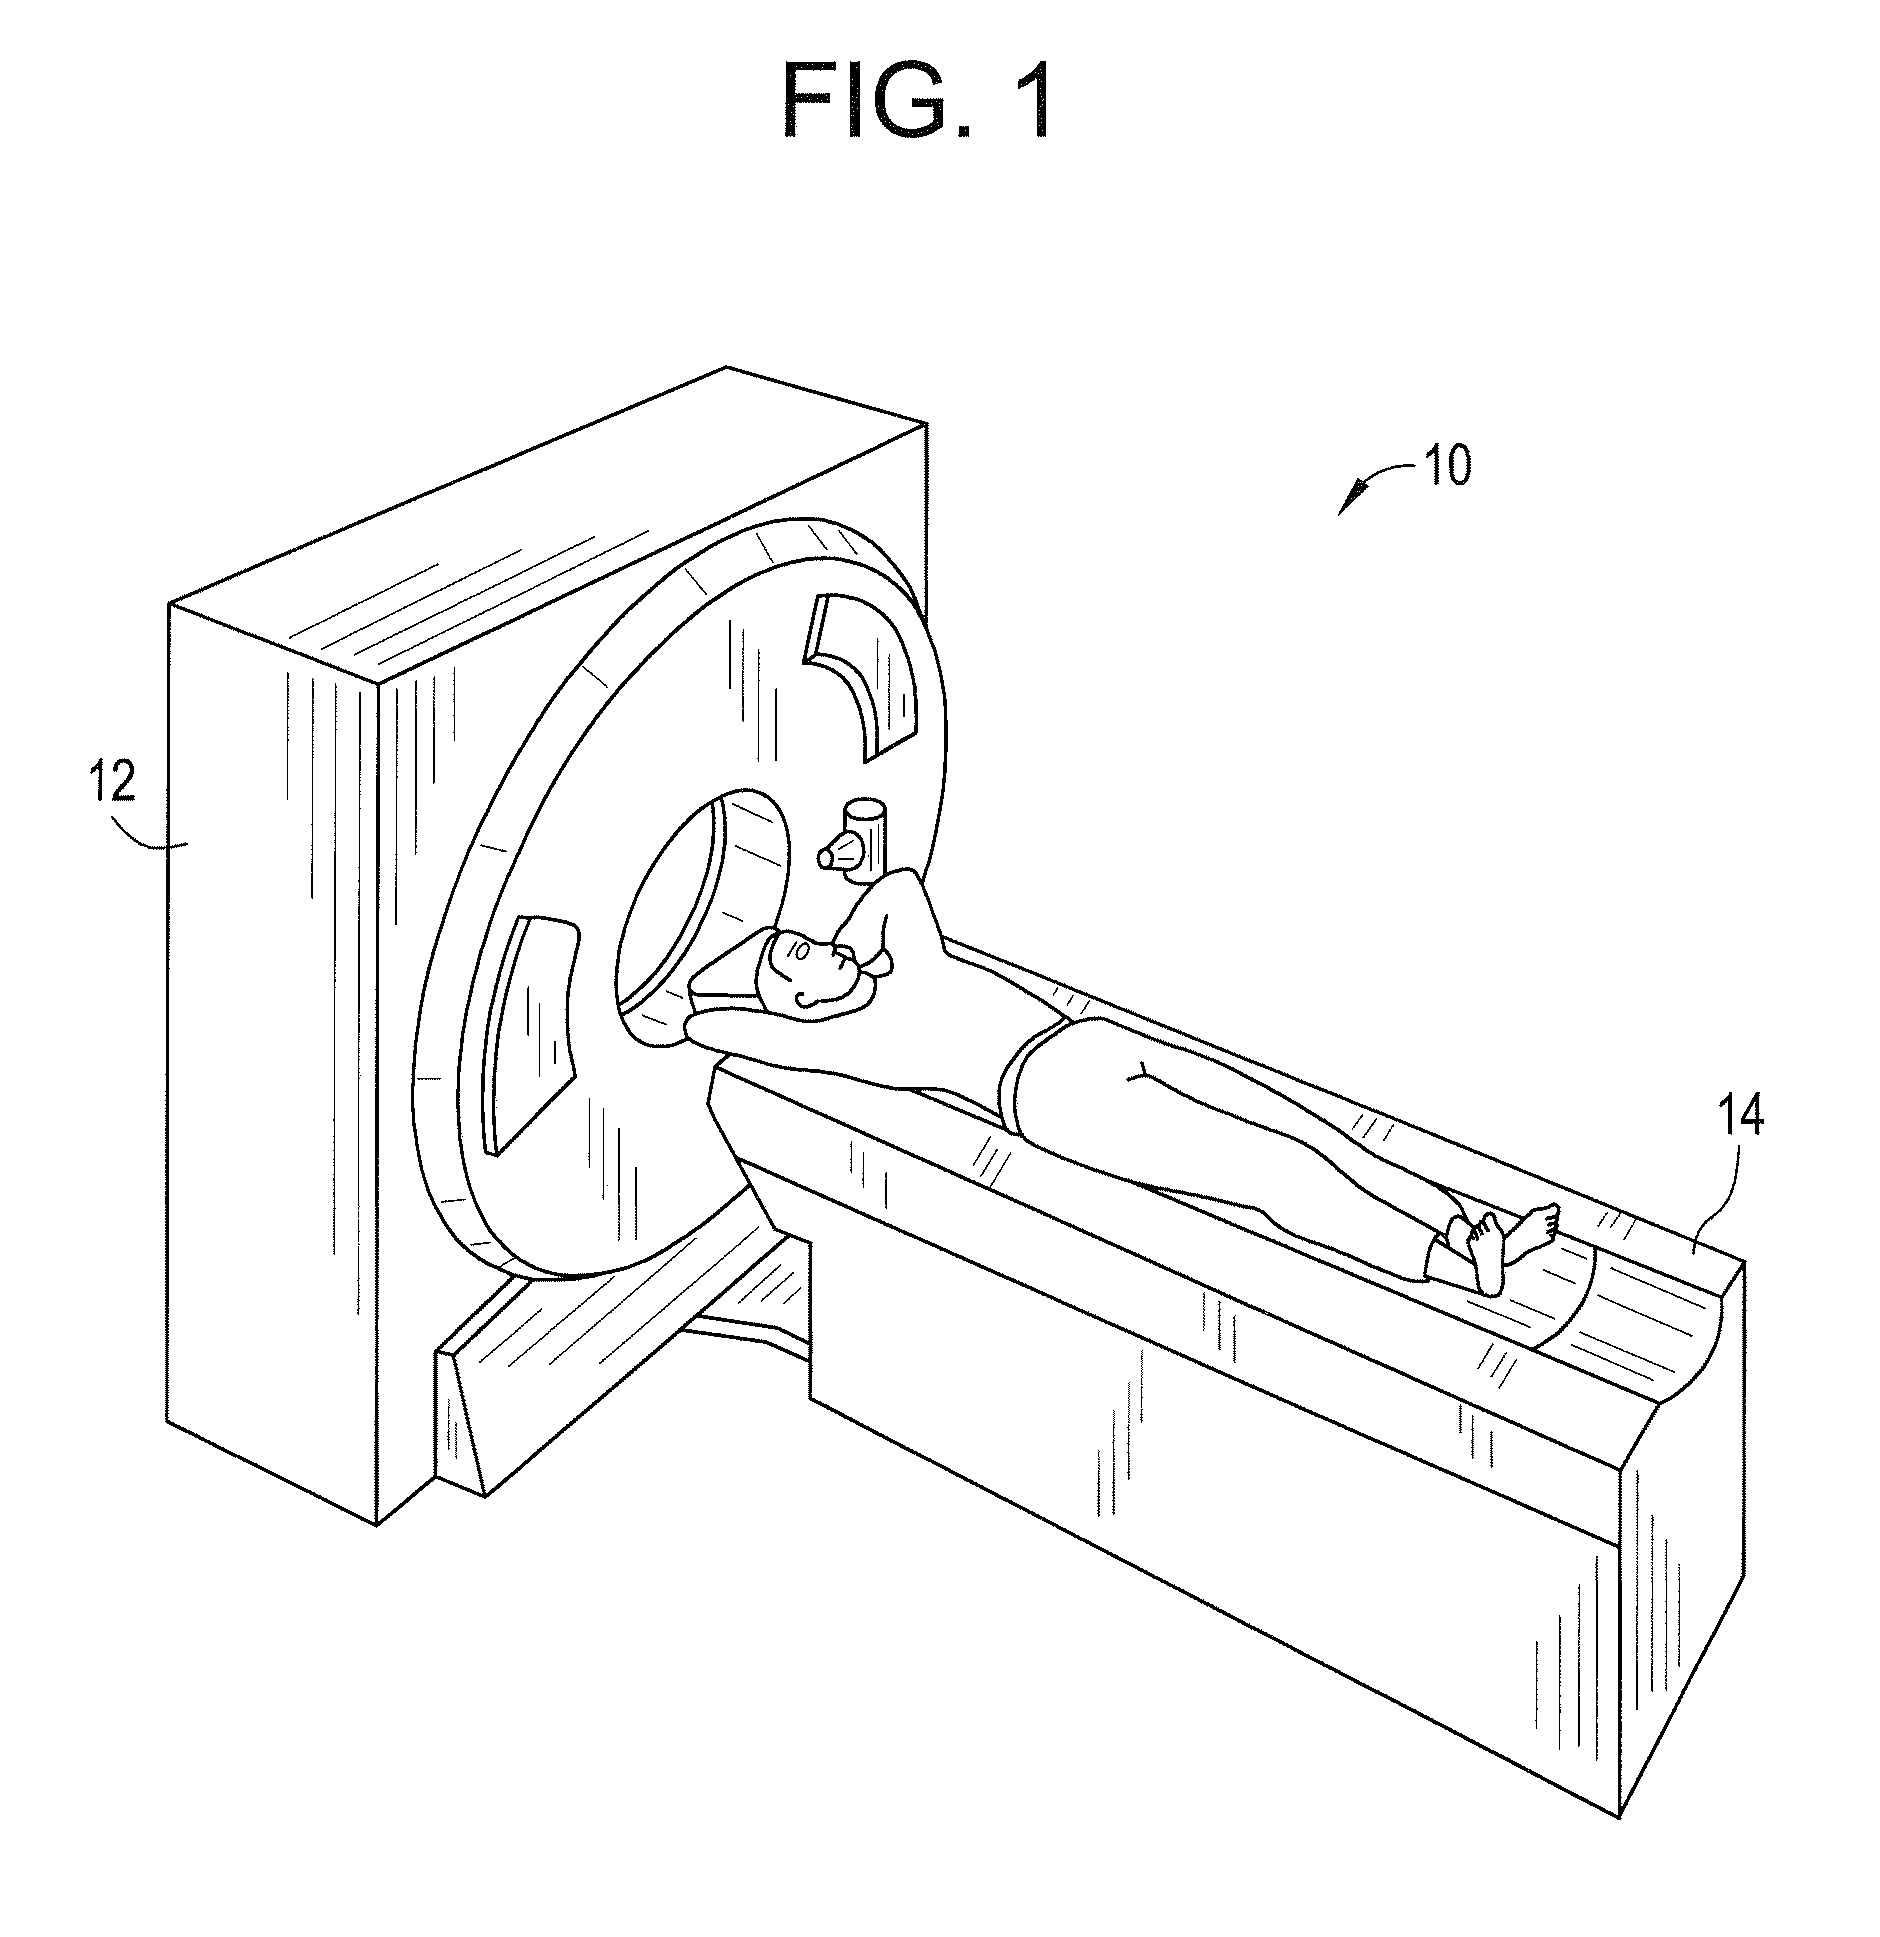 Electron emitter assembly and method for adjusting a power level of electron beams